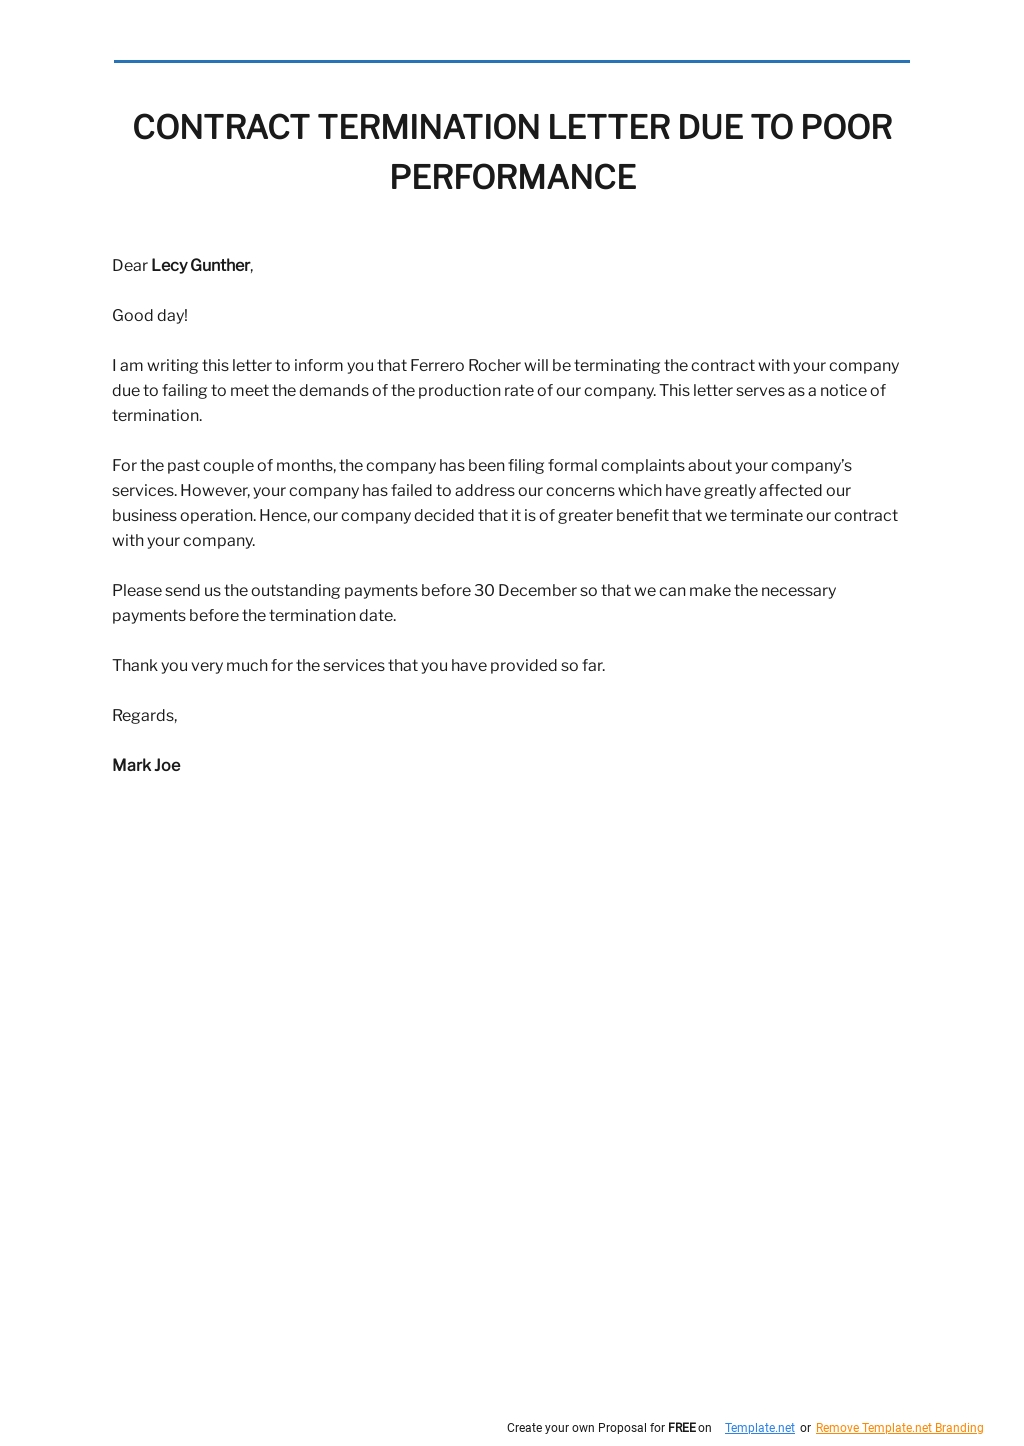 Free Contract Termination Letter Due To Poor Performance Template.jpe